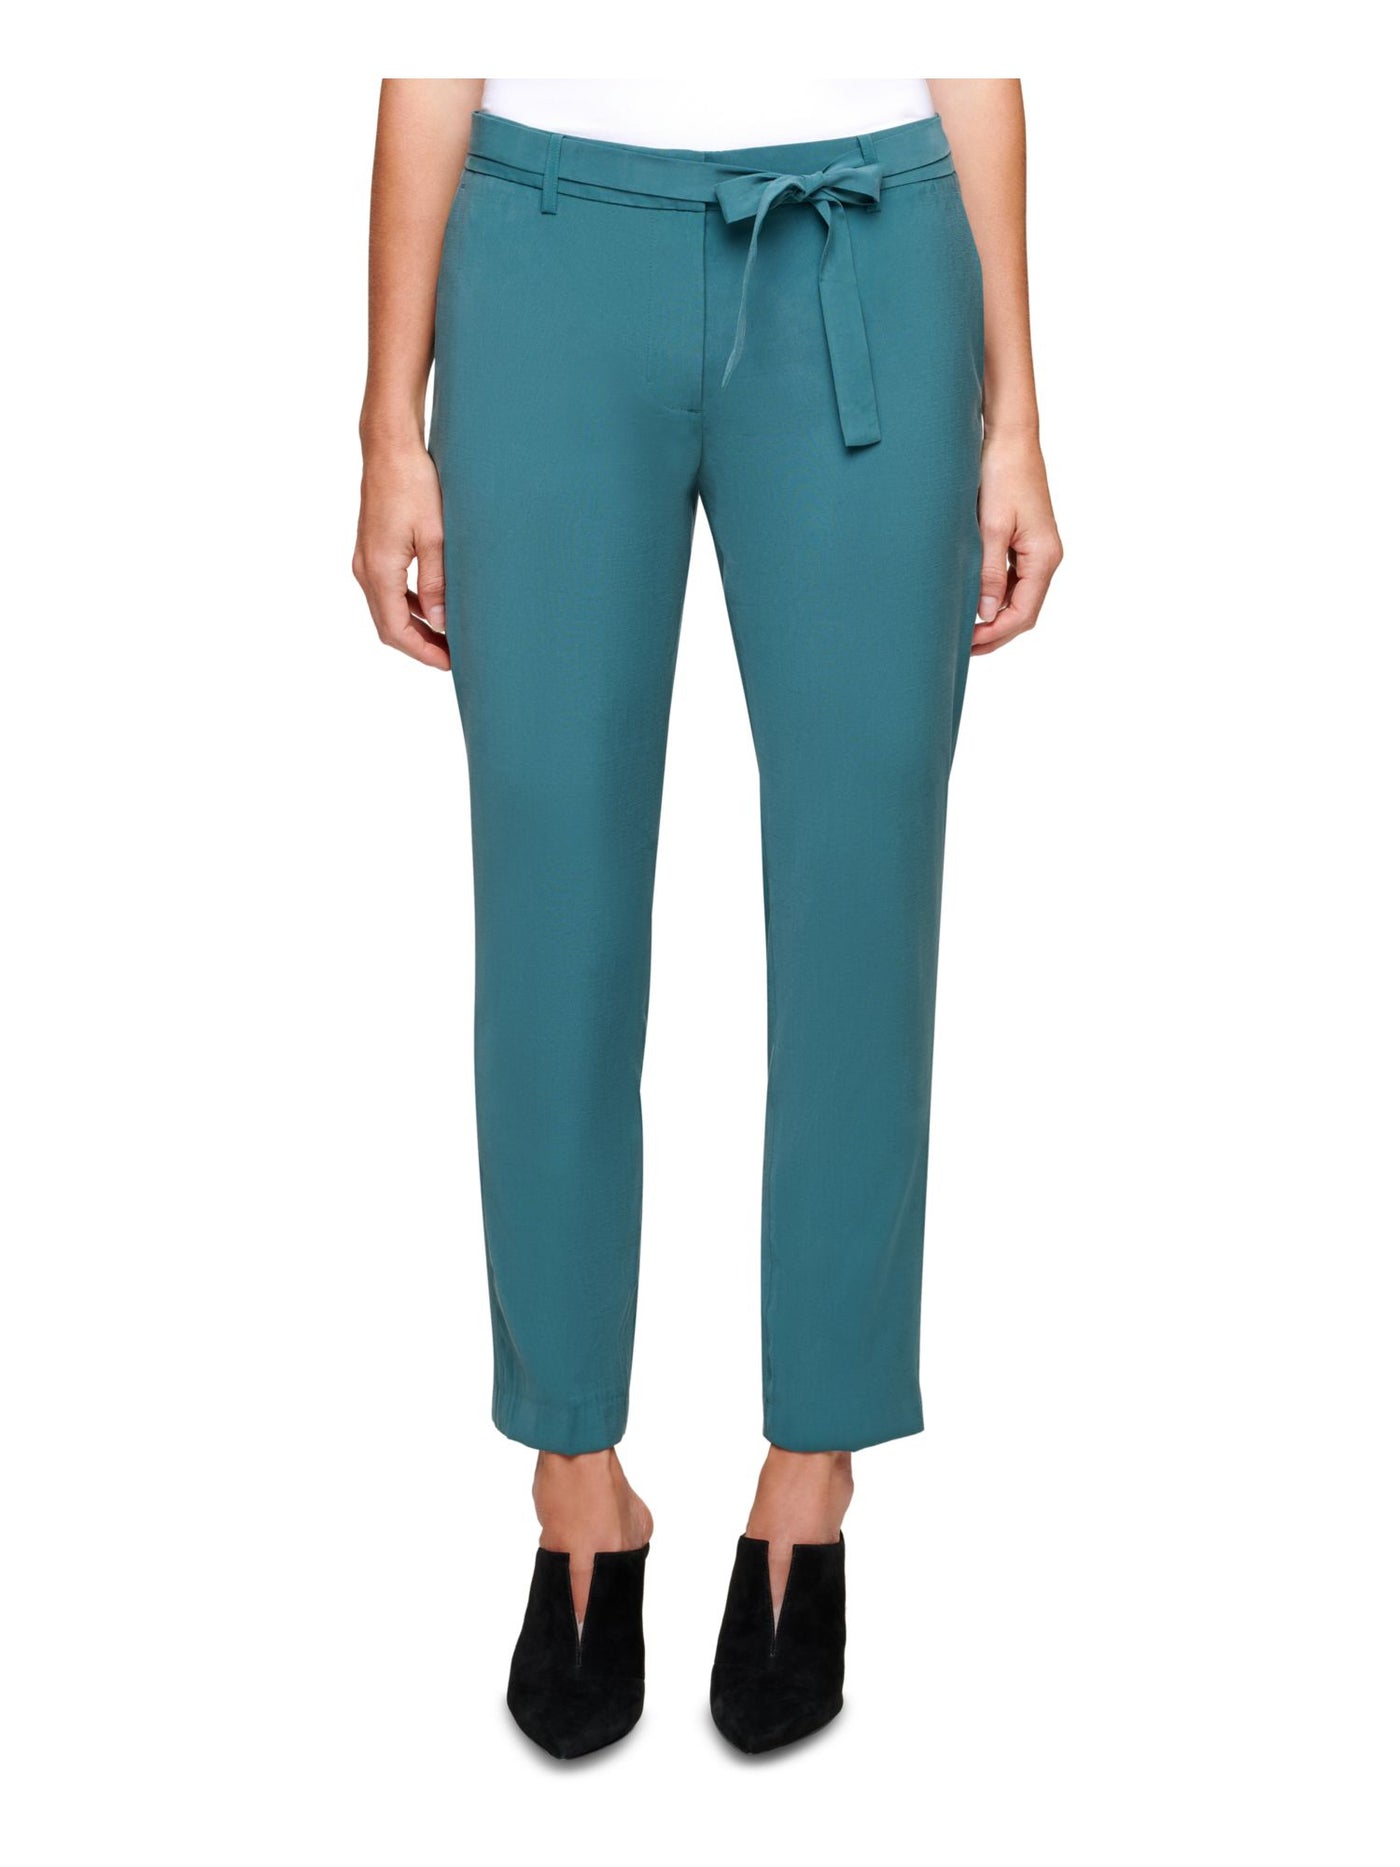 DKNY Womens Teal Pocketed Wear To Work Cropped Pants Petites 6P